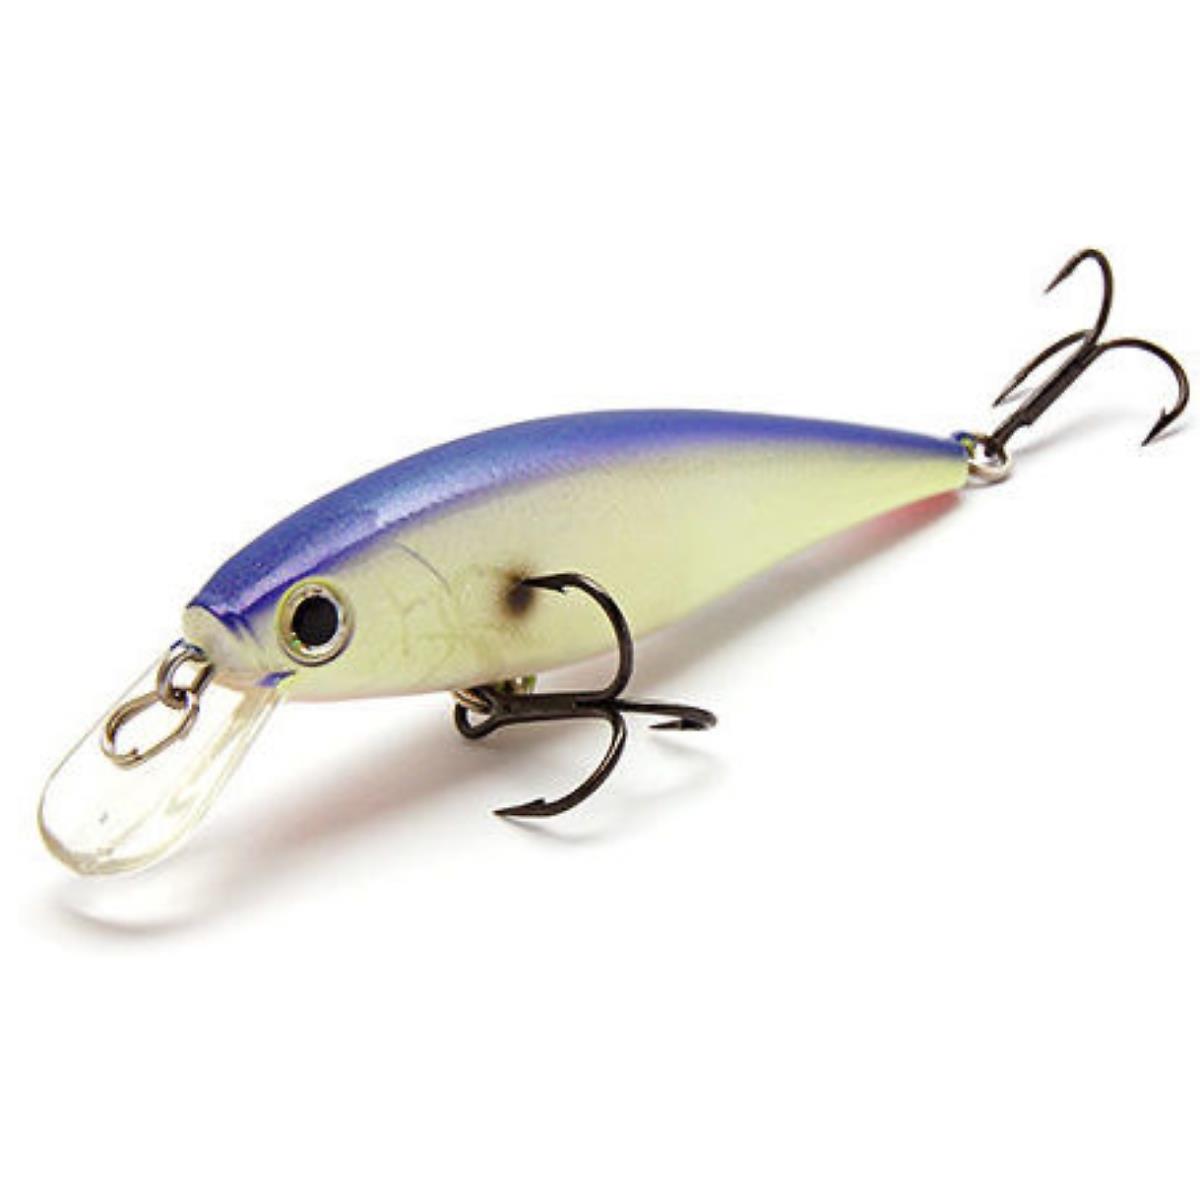 Воблер Pointer 78-261 Table Rock Shad Lucky Craft воблер pointer 100dd 180 flake flake golden sun fish lucky craft